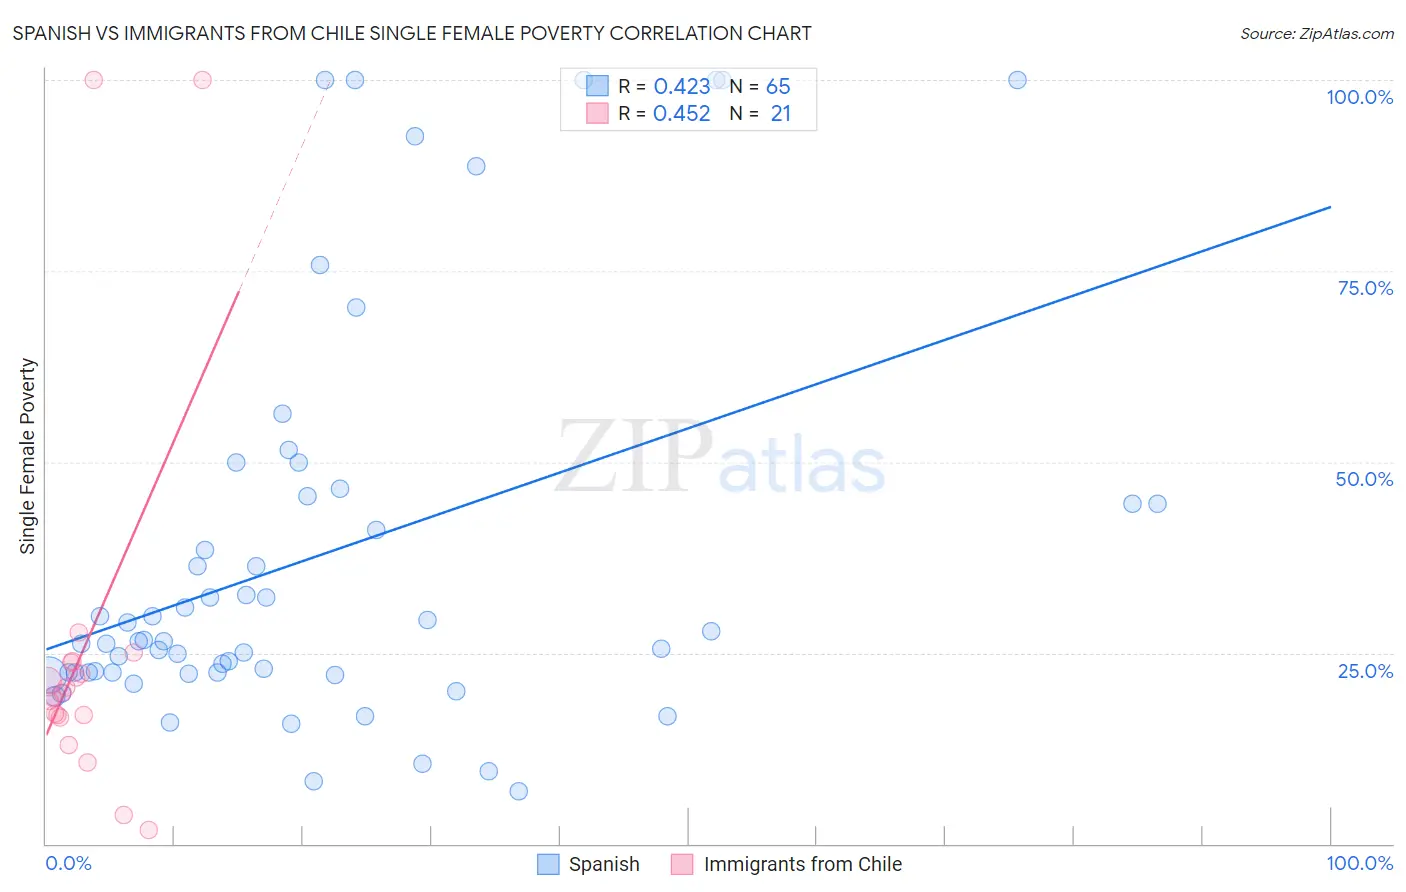 Spanish vs Immigrants from Chile Single Female Poverty